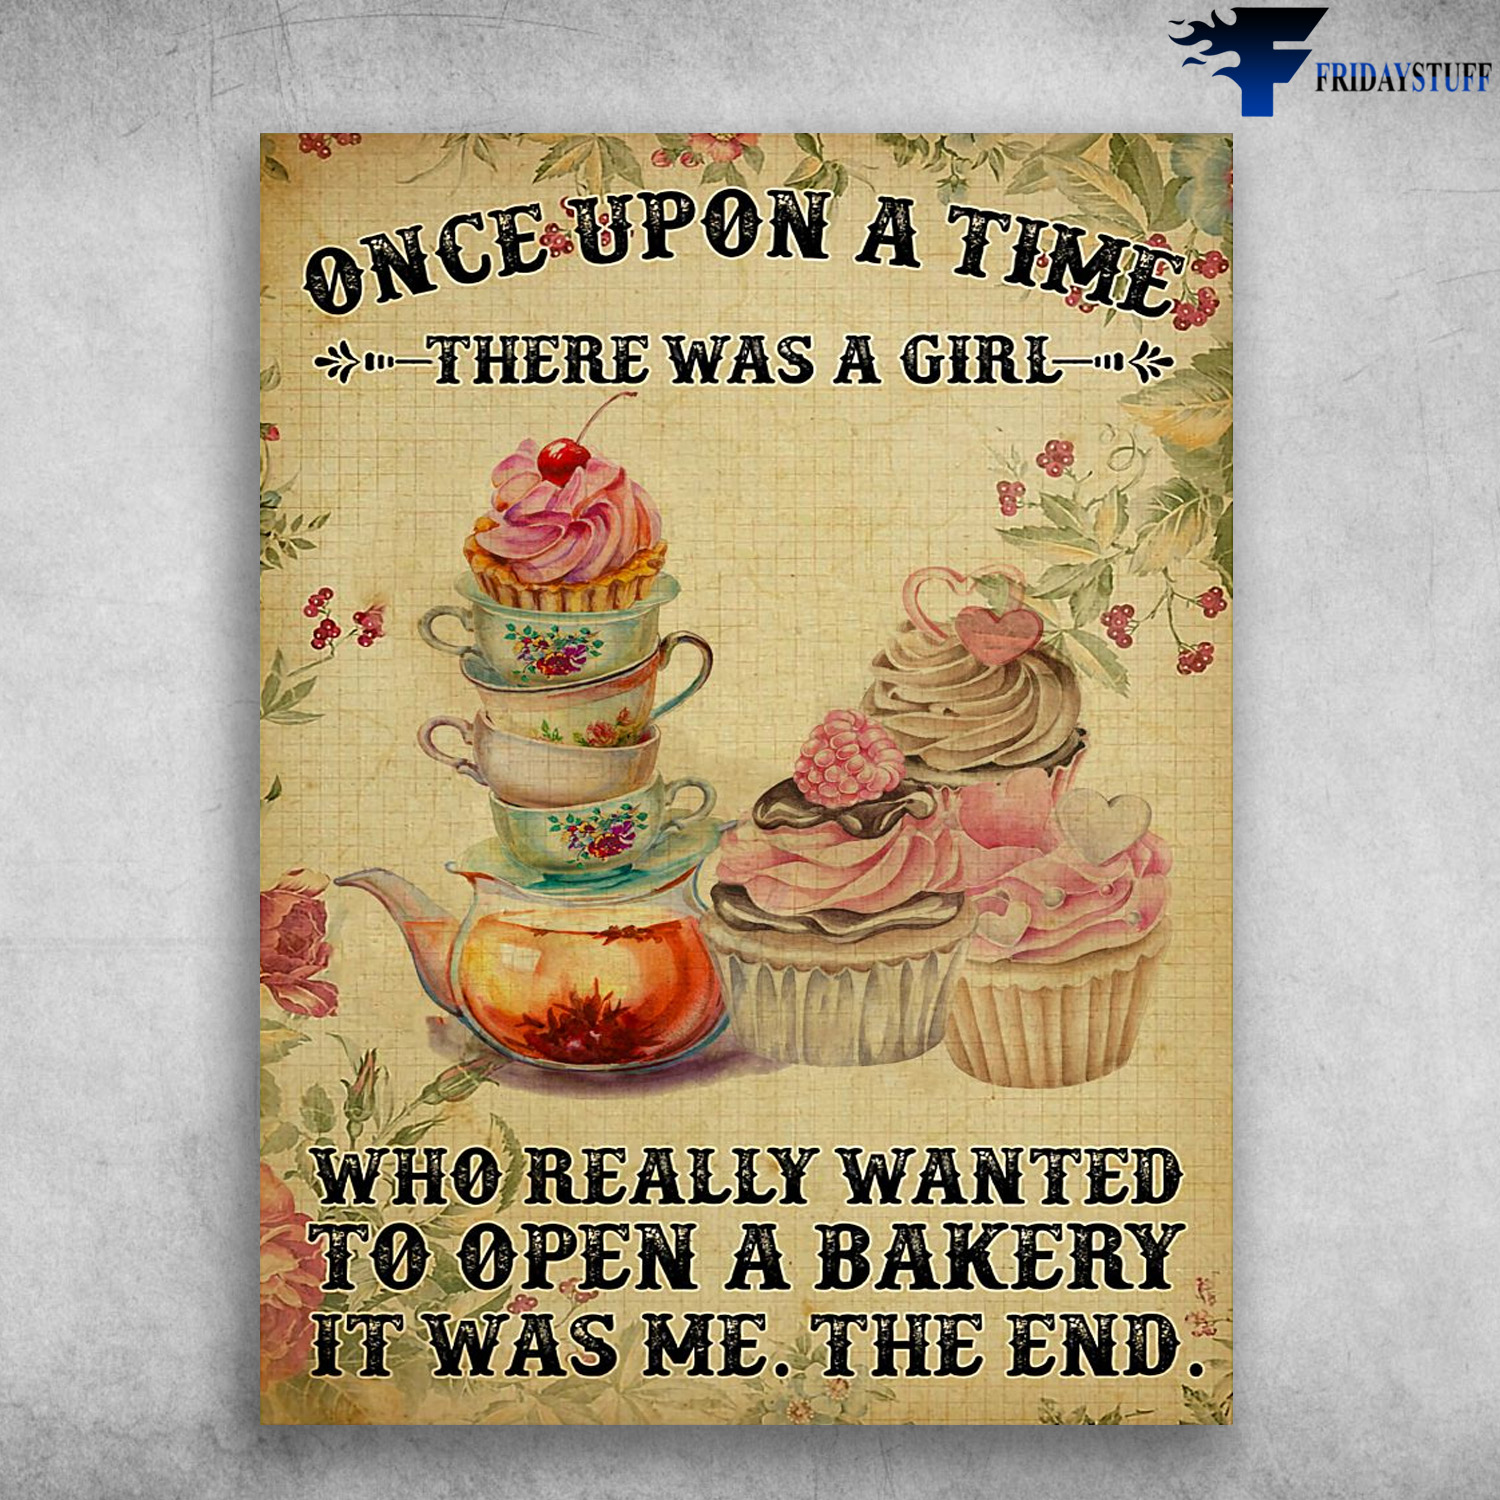 Bakery Poster, Tea And Cake - Once Upon A Time, There Was A Girl, Who Really Wanted, To Open A Bakery, It Was Me, The End